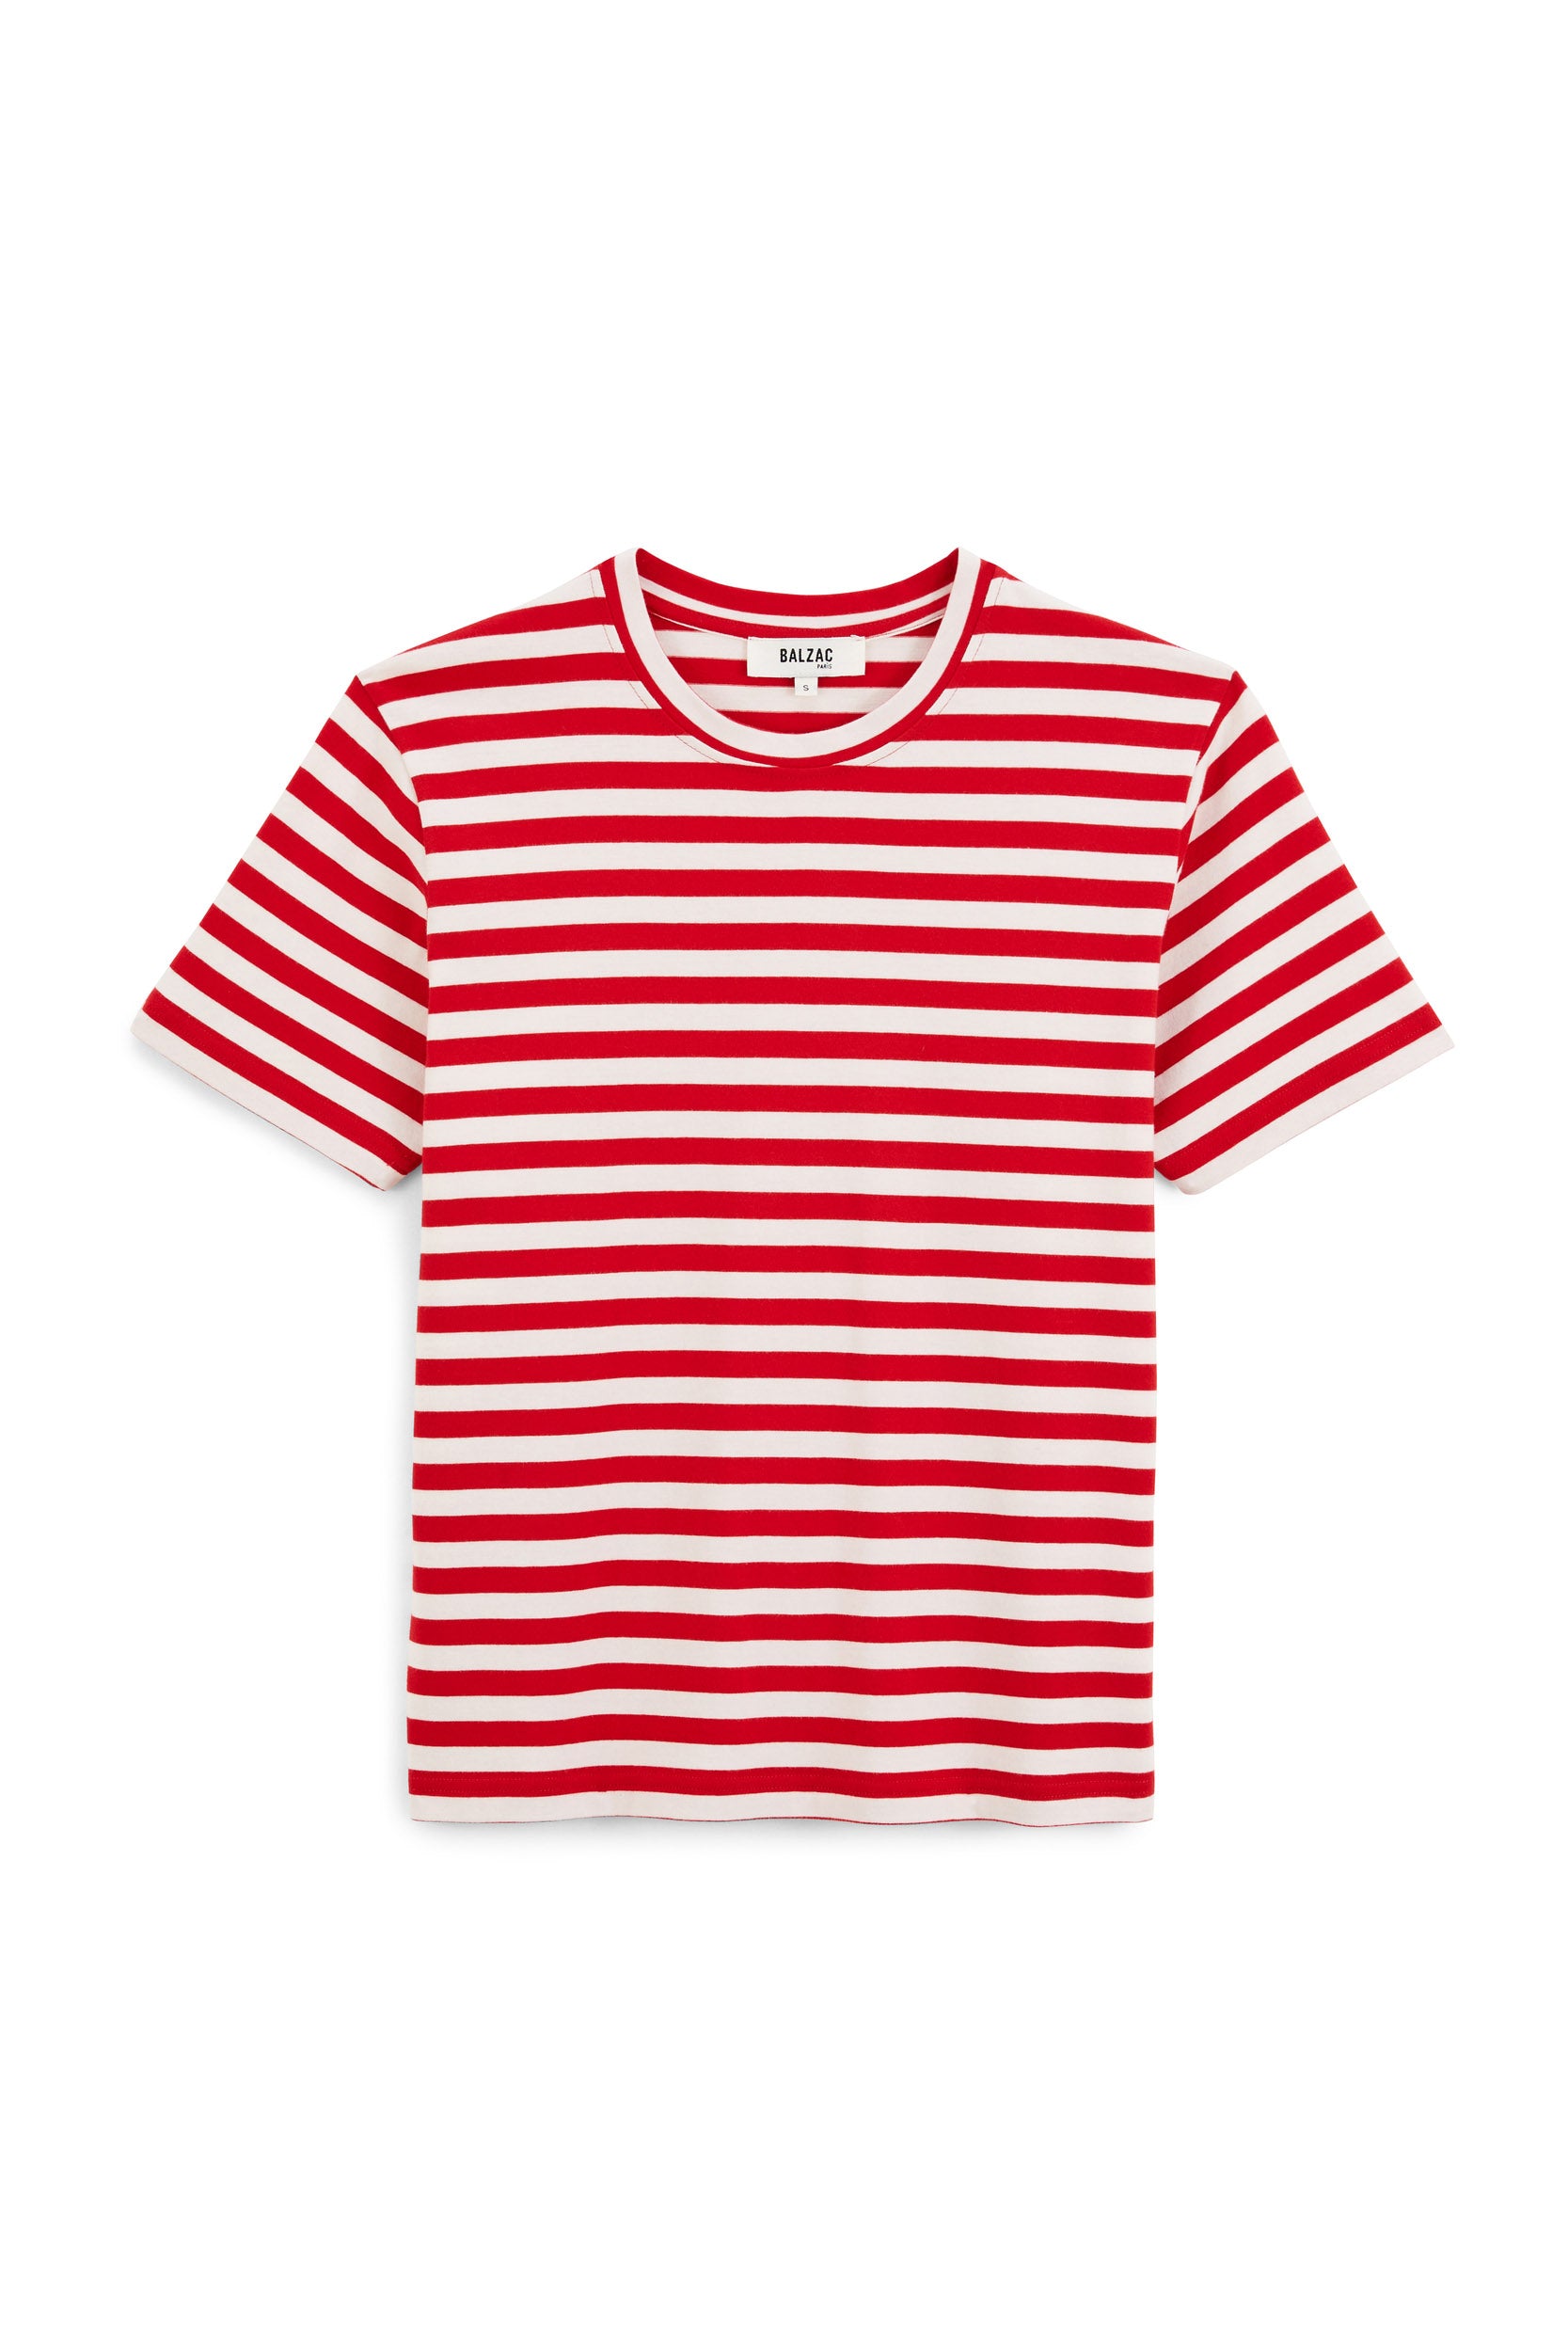 Bree red and white striped t-shirt